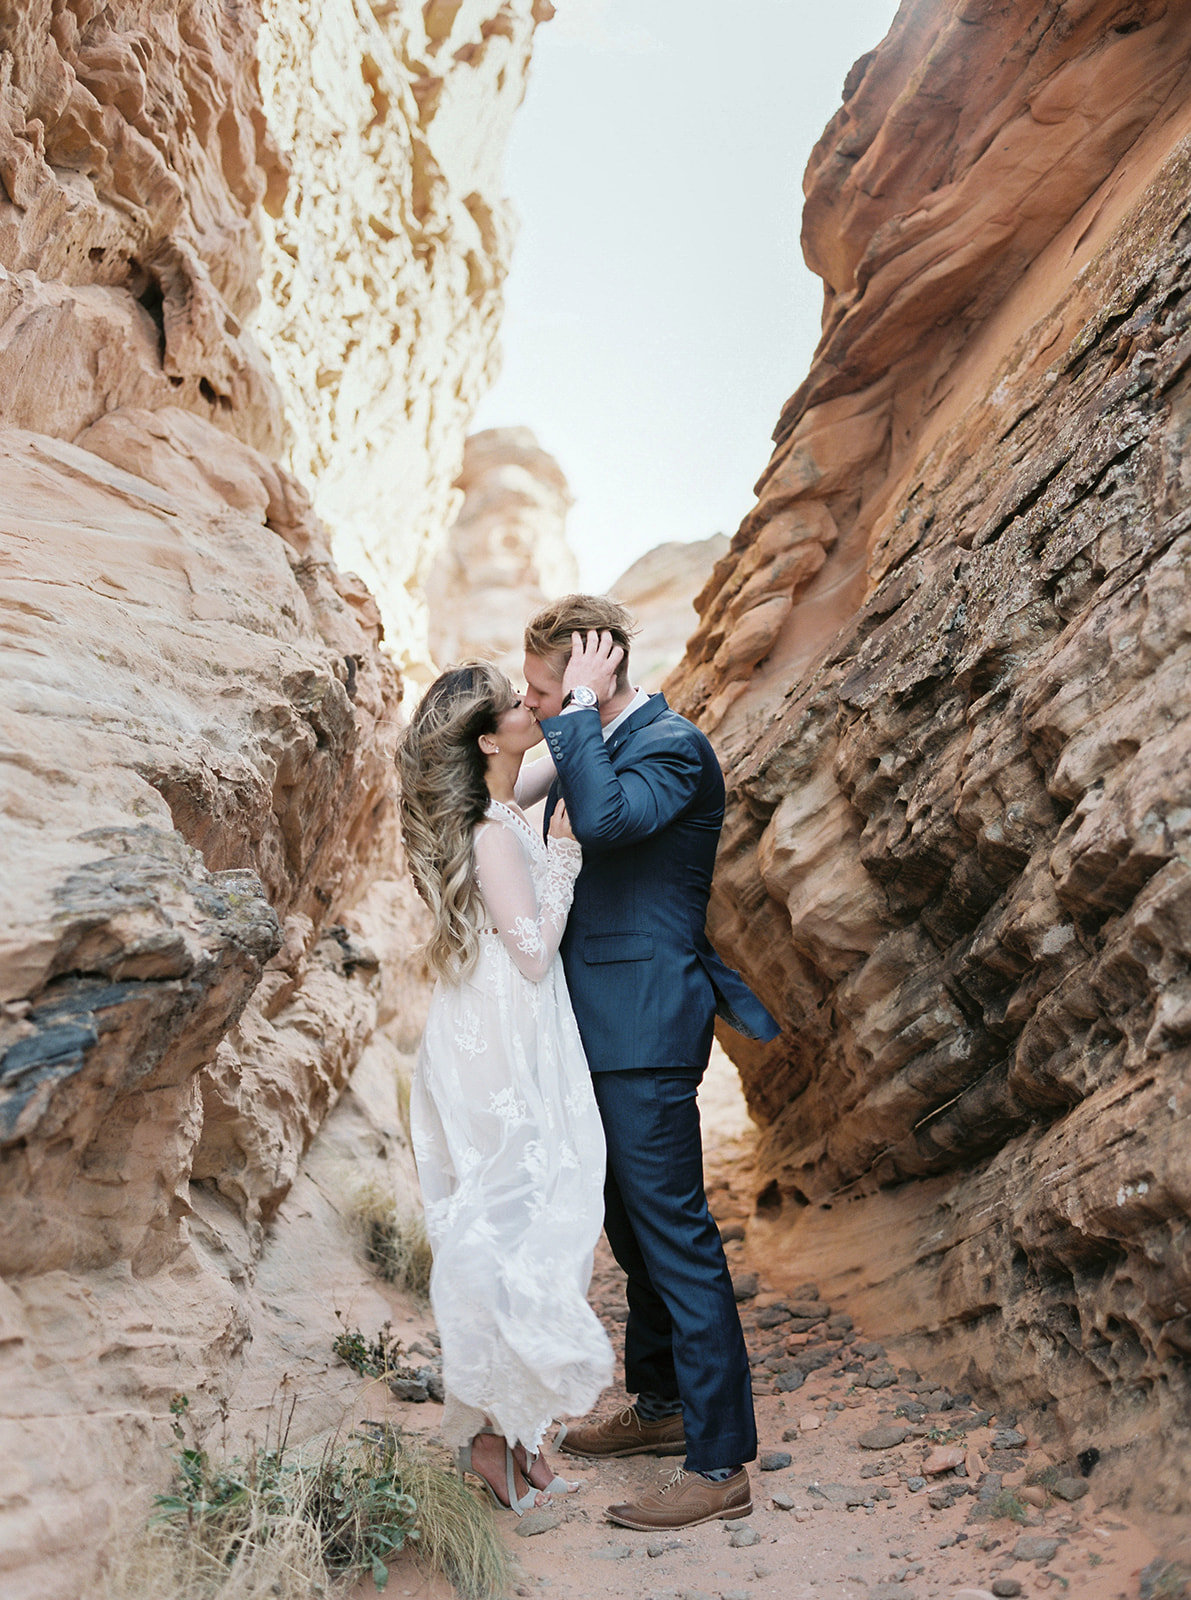 intimate moment with a bride and groom during their elopement day in Zion National Park.